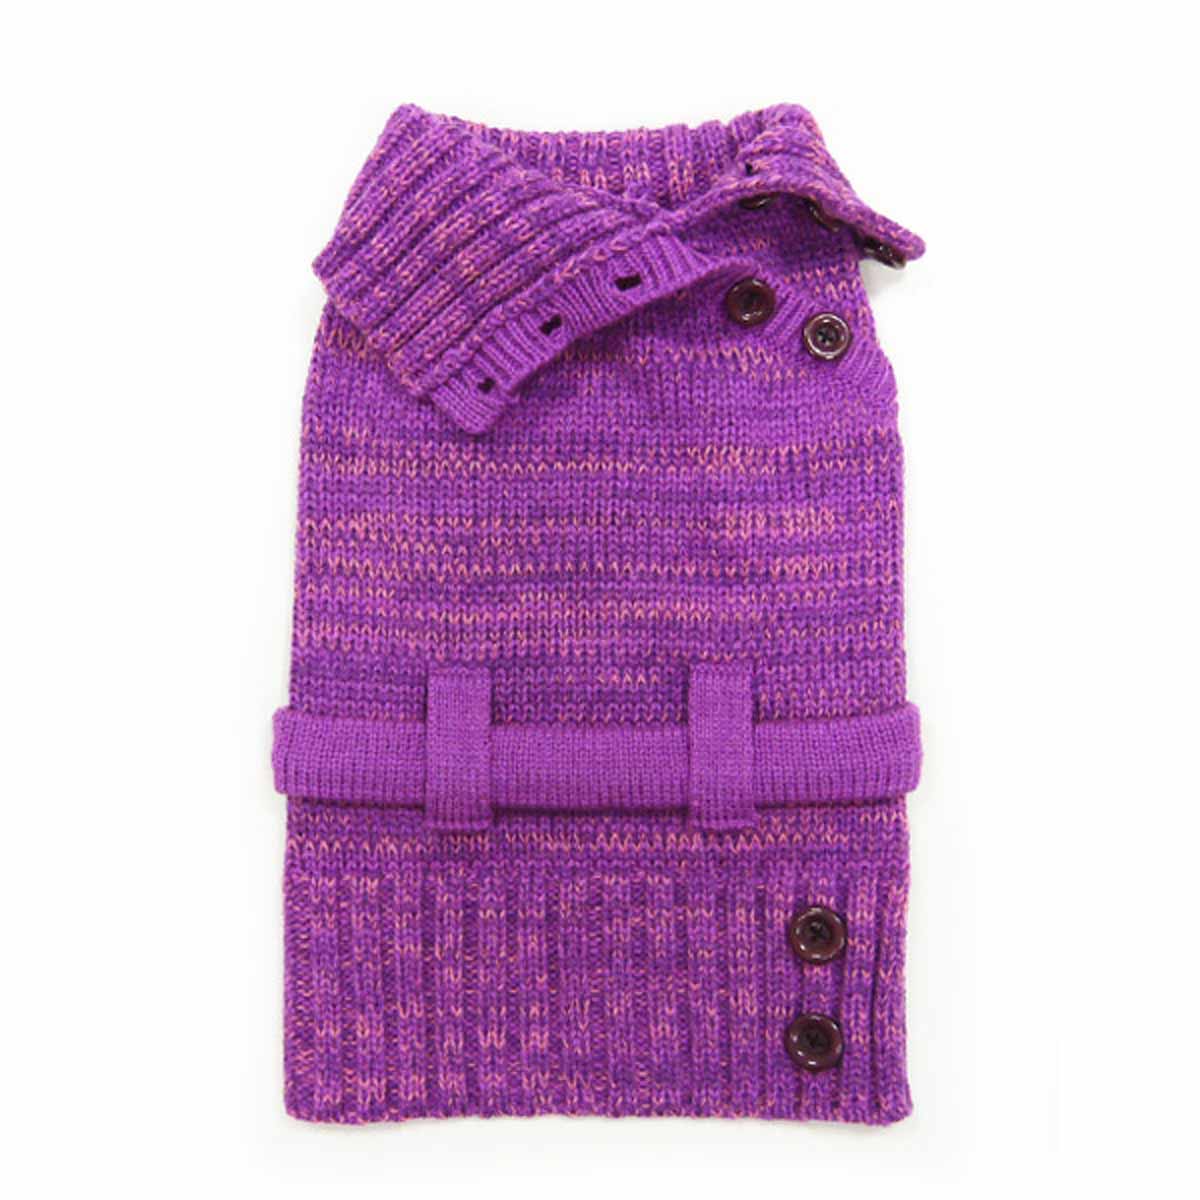 Multiway Dog Sweater by Dogo - Purple